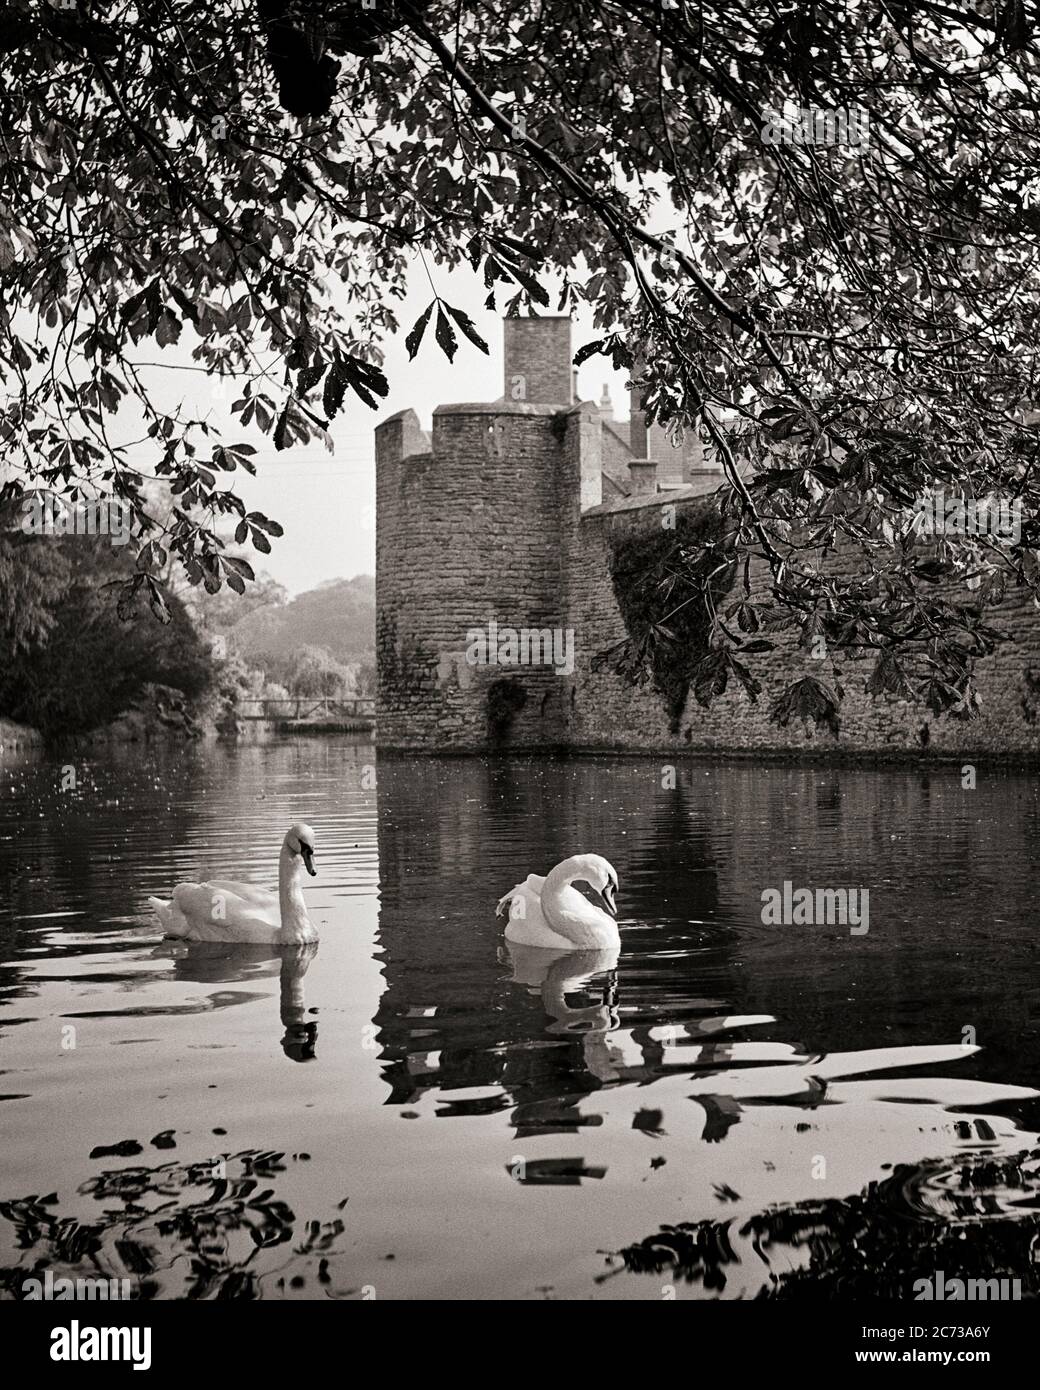 1960s SWANS SWIMMING IN THE MOST AROUND THE BISHOP’S PALACE IN WELLS SOMERSET ENGLAND UK - r3129 HAR001 HARS WELLS WINGED 1300s BLACK AND WHITE EGG-LAYING GREAT BRITAIN HAR001 OLD FASHIONED SWANS UNITED KINGDOM Stock Photo